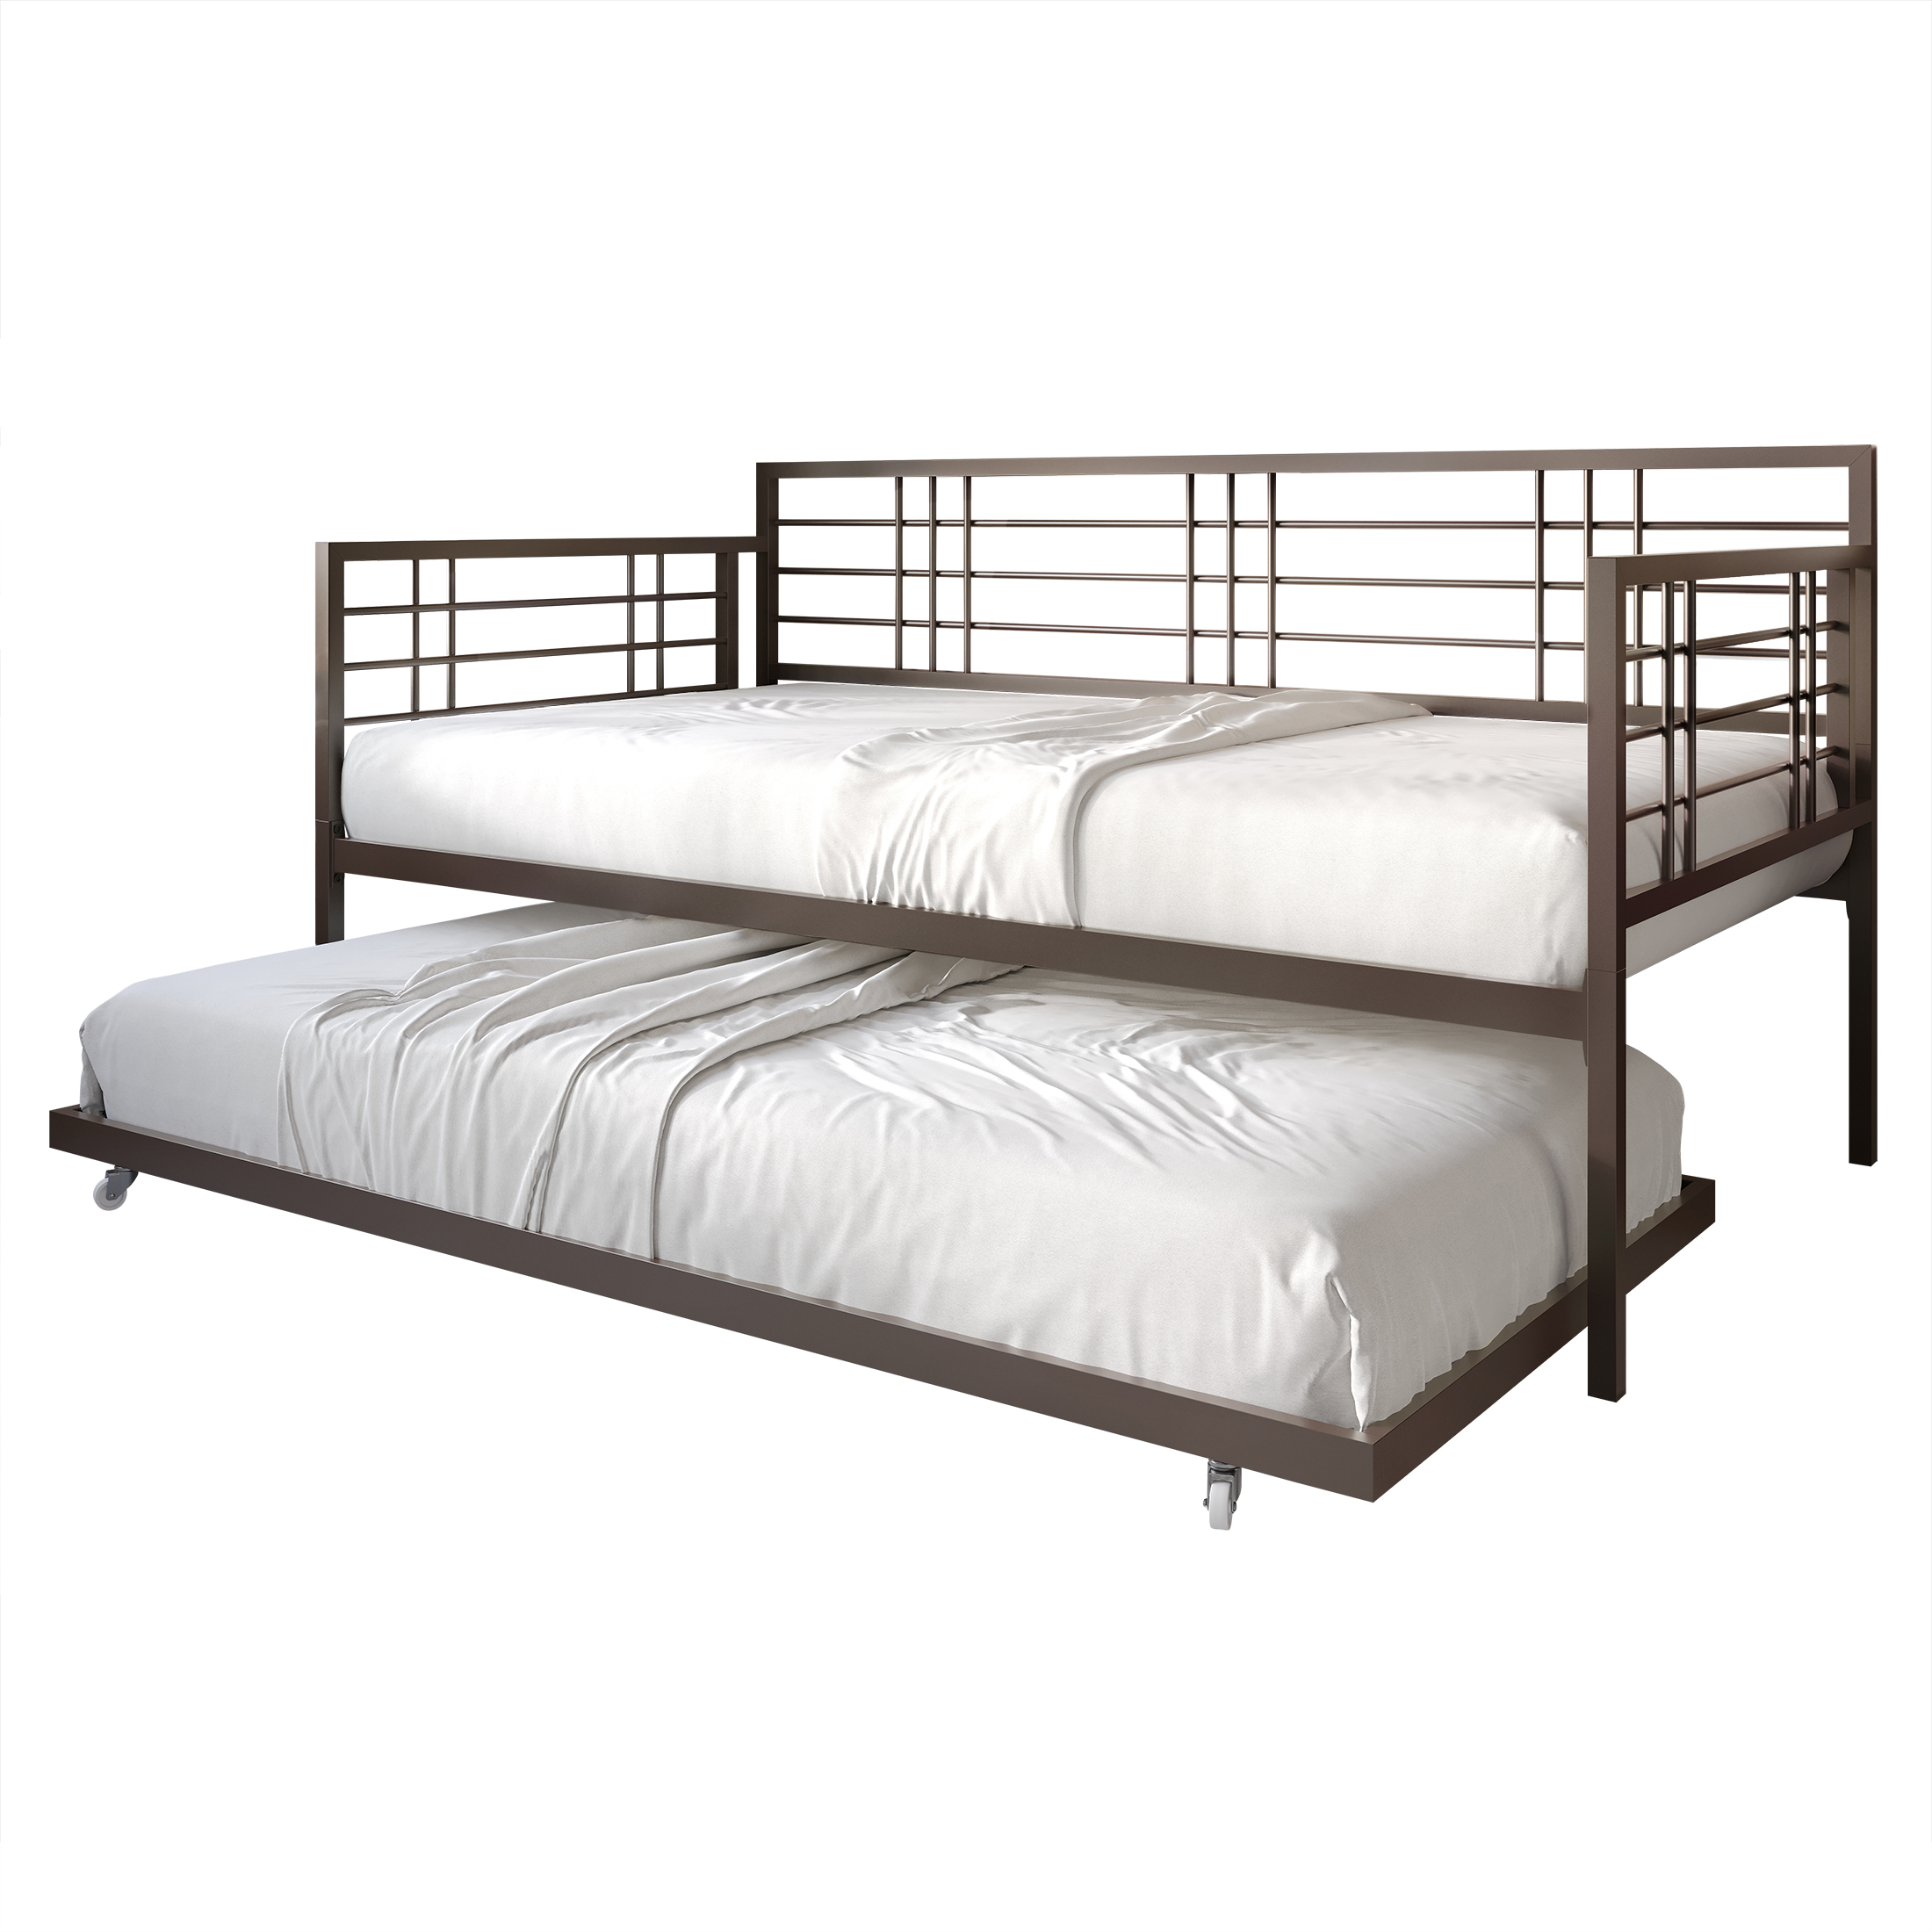 Castle Place Elegance Twin Size Metal Daybed with Trundle, Brown - image 2 of 7